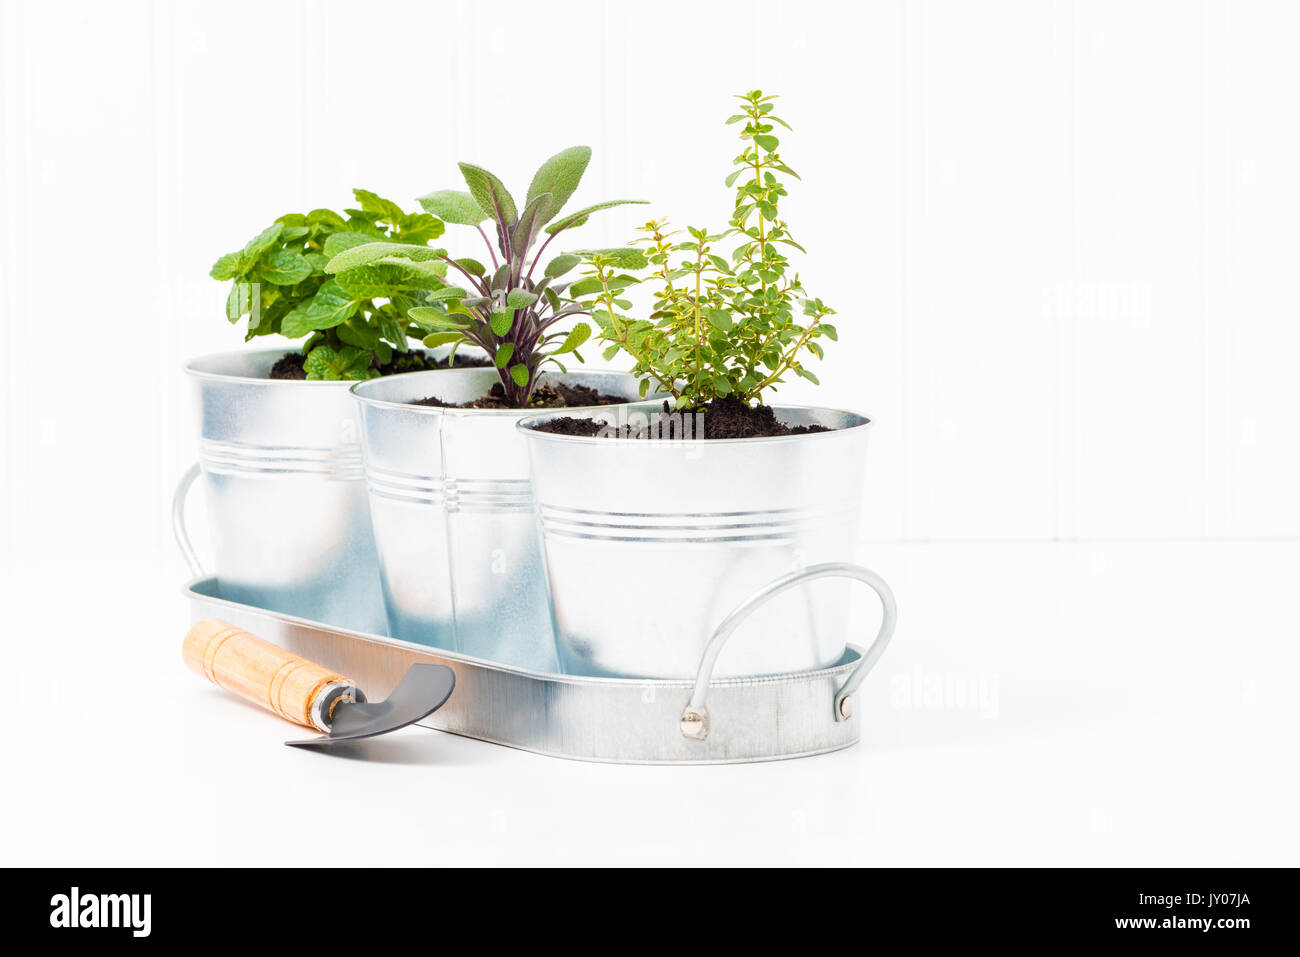 Small herbs in a metal container to create a small indoor herb garden. Stock Photo